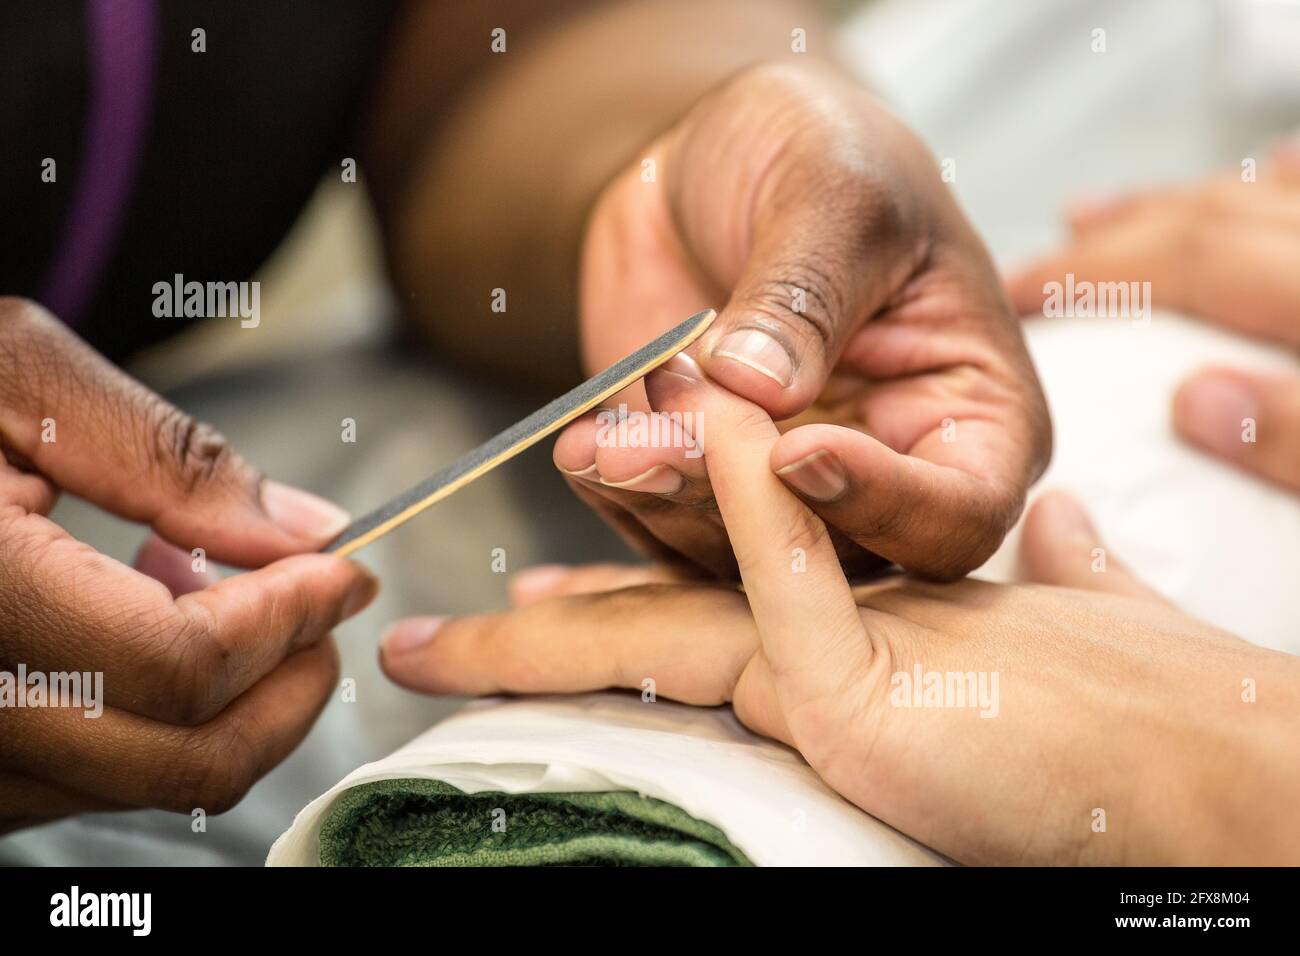 A Caucasian female having her fingernails being manicured by ab Afro-Caribbean female in a beauty parlour, her other hand resting on a towel Stock Photo